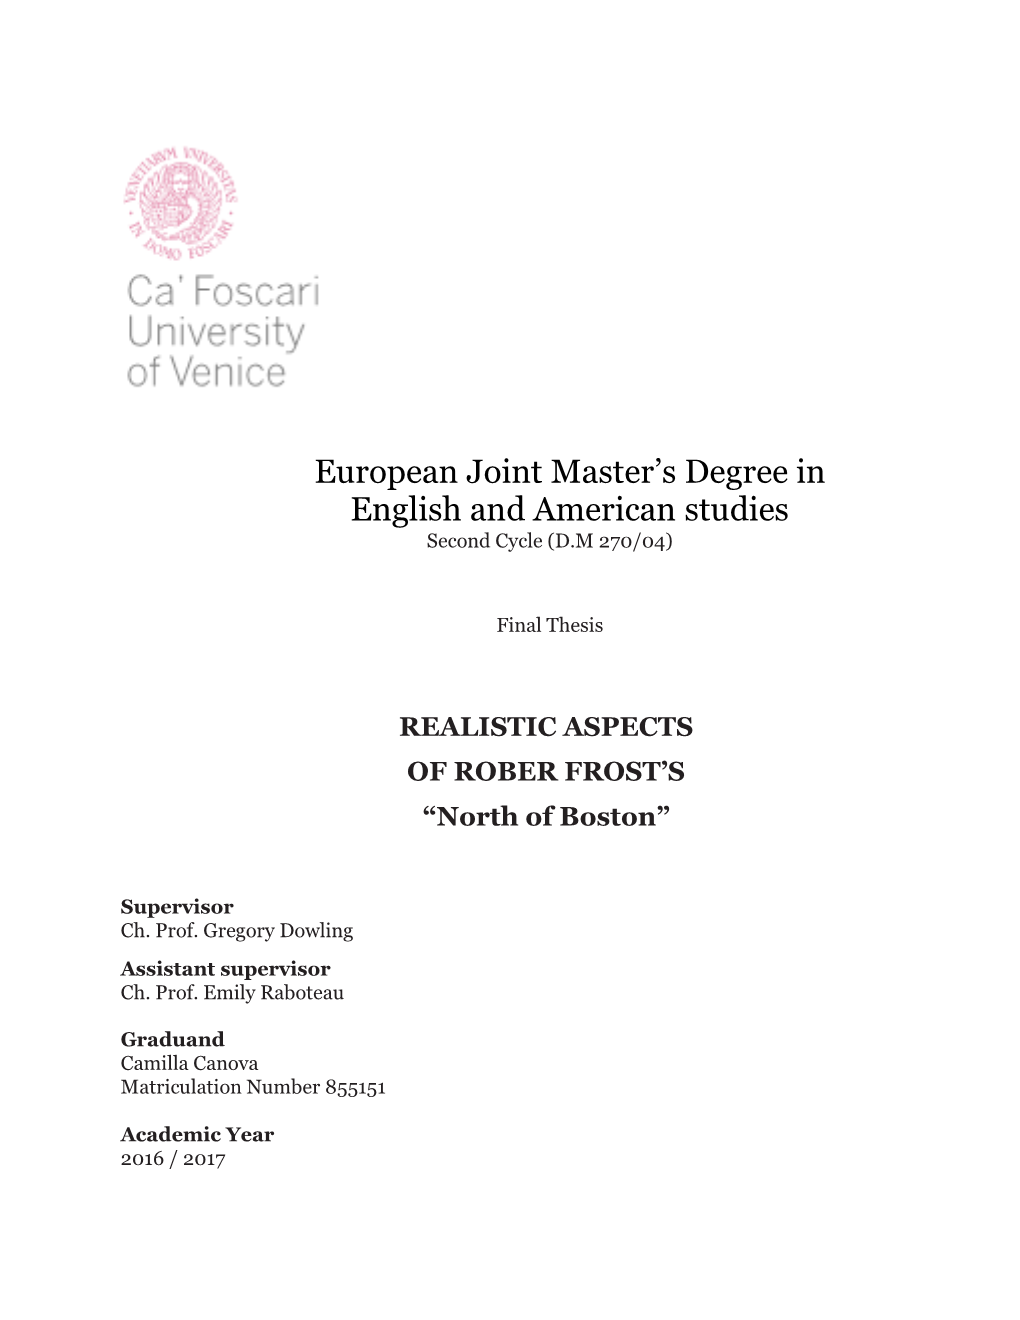 European Joint Master's Degree in English and American Studies